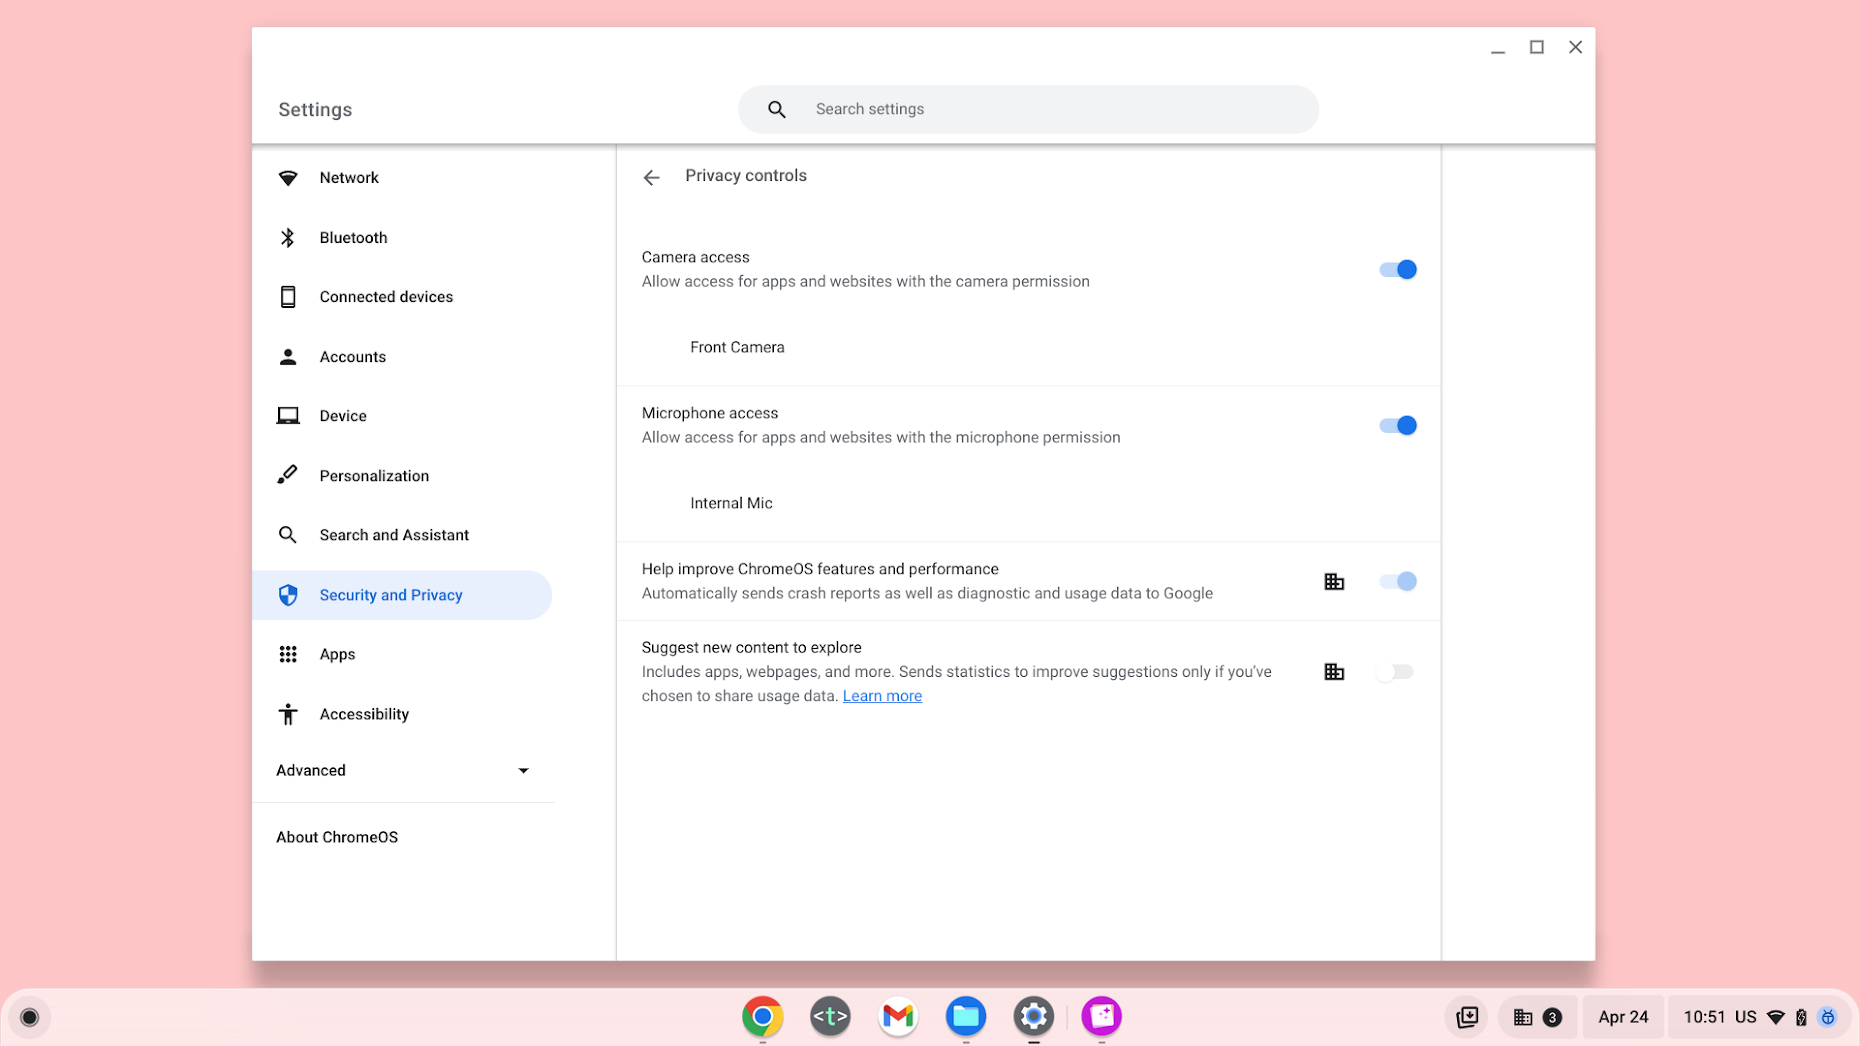 ChromeOS is getting privacy controls for camera and microphone